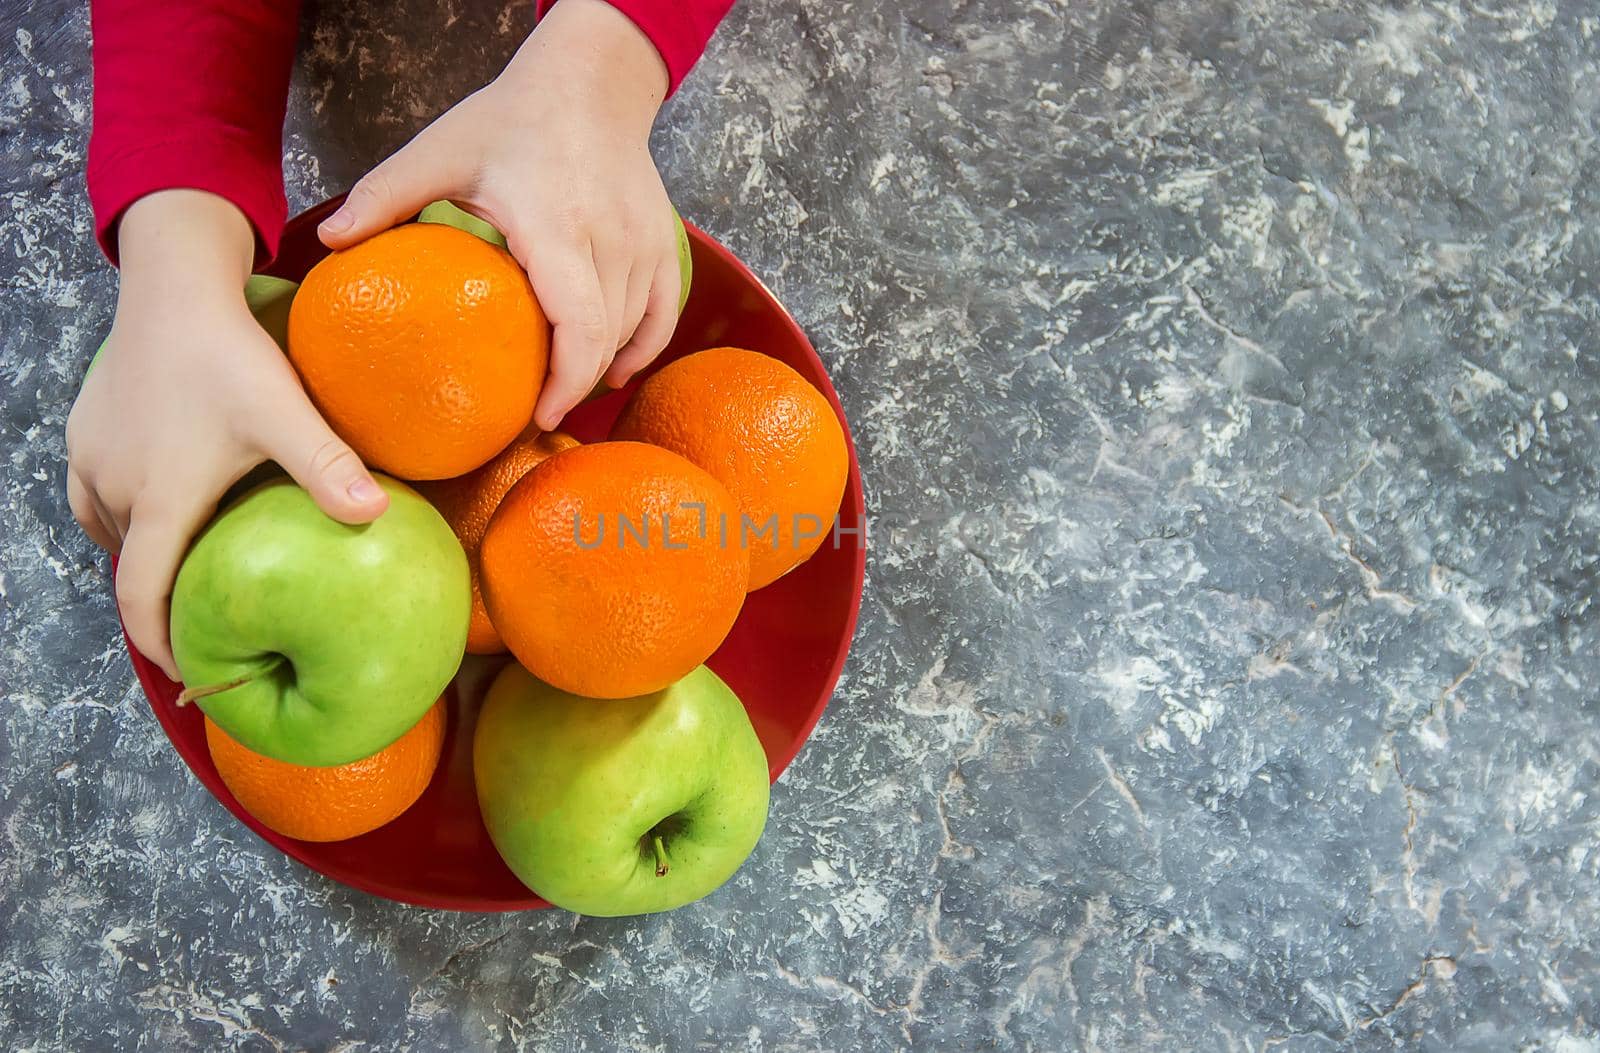 apples and oranges in the hands of a child. by yanadjana